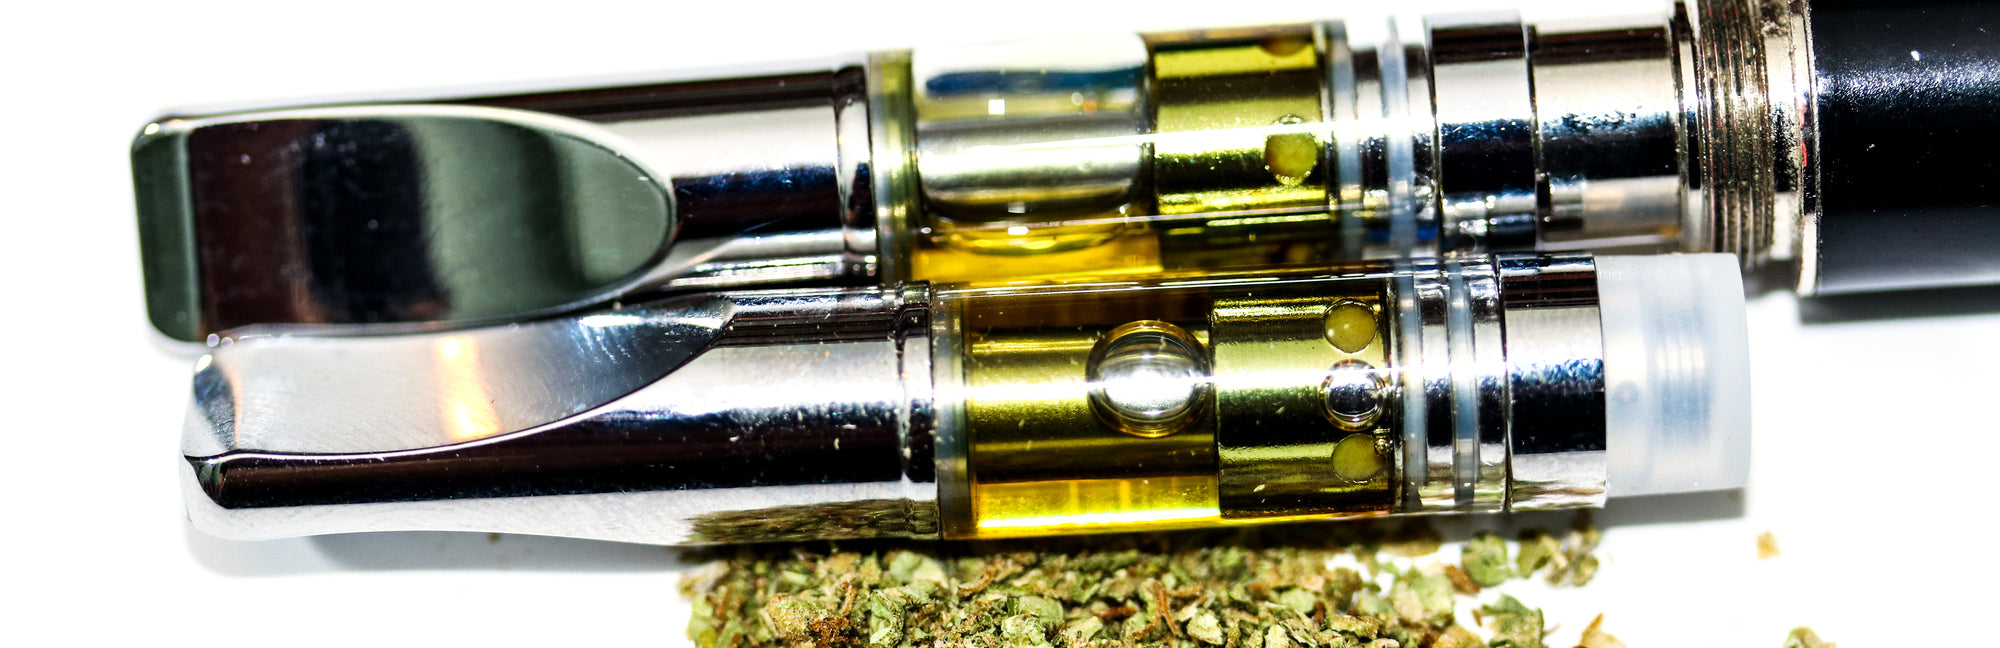 Weed Carts vs Dab Pens and Wax Pens: The Ultimate Comparison